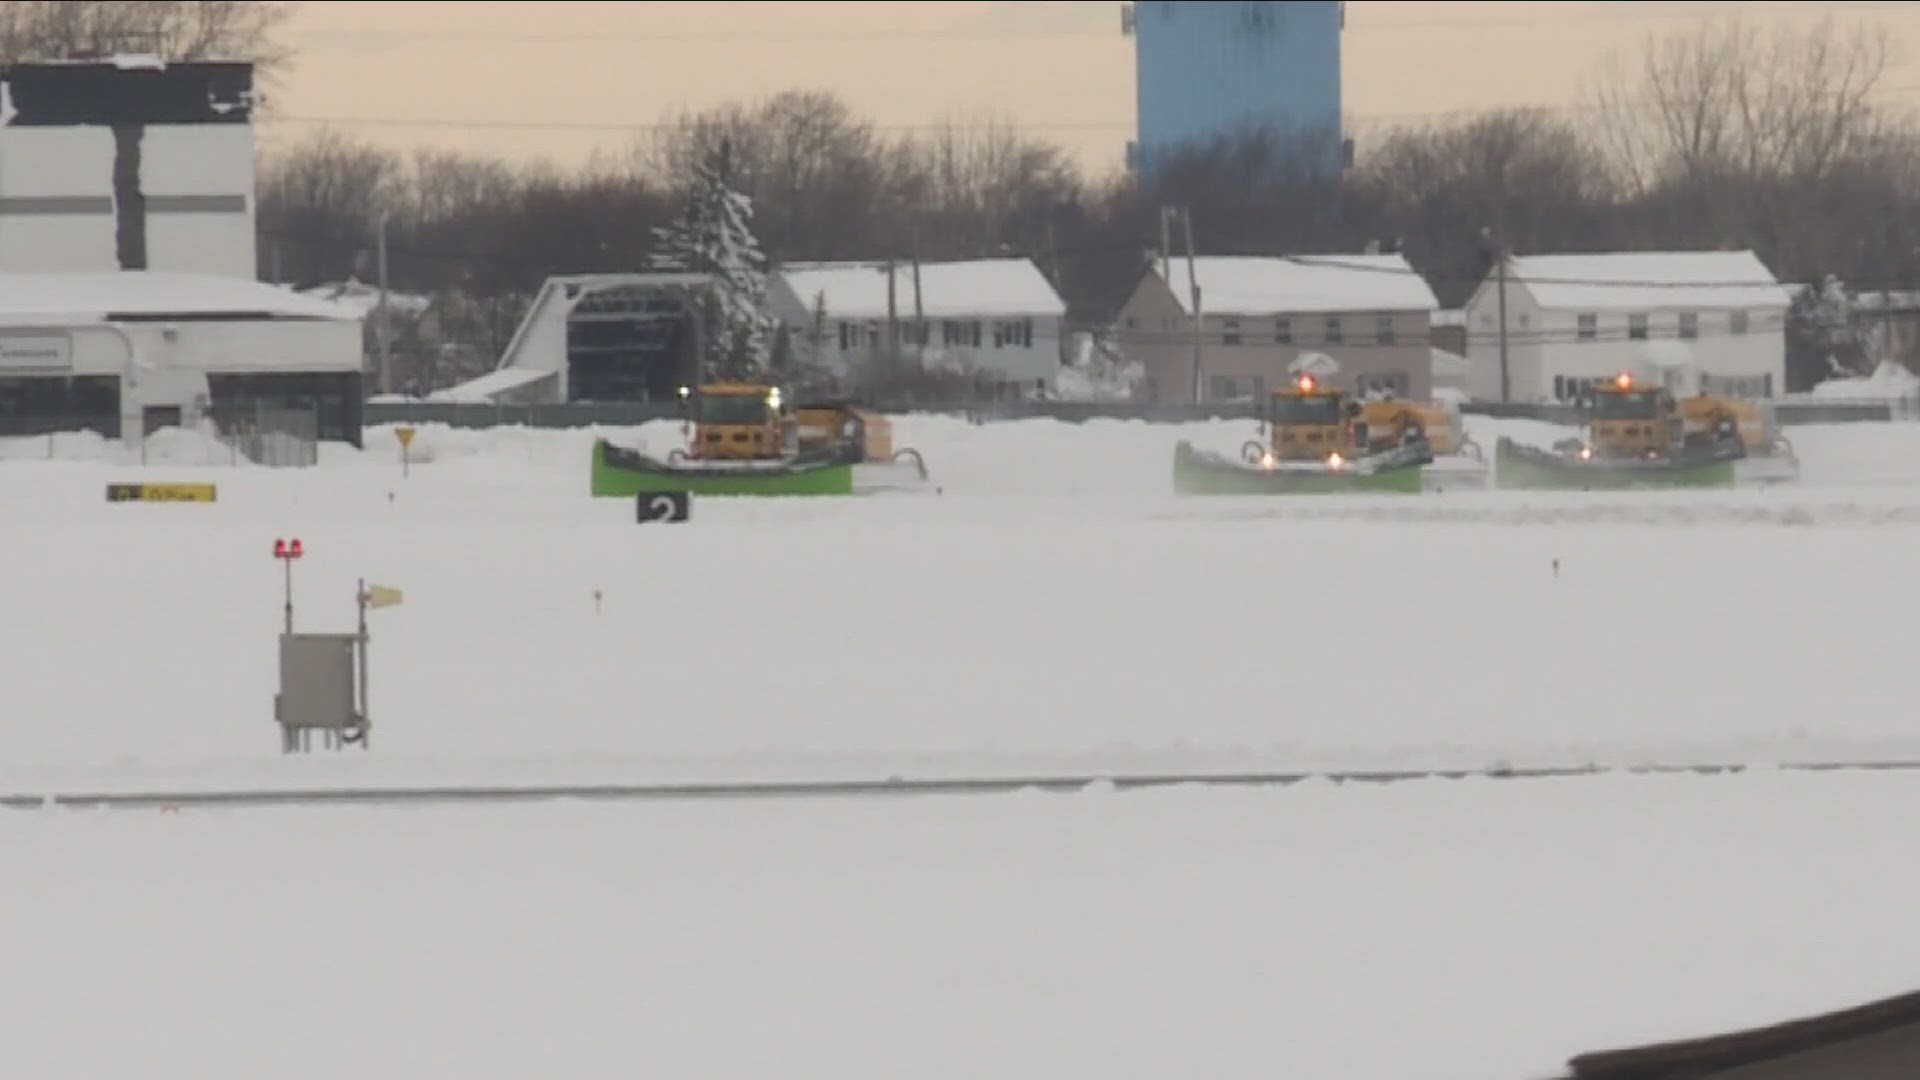 THE AIRPORT SAYS IT HAS EXTRA EQUIPMENT AND SNOWPLOWS READY TO HELP MOVE SNOW OFF OF THE AIRPORT'S RUNWAYS